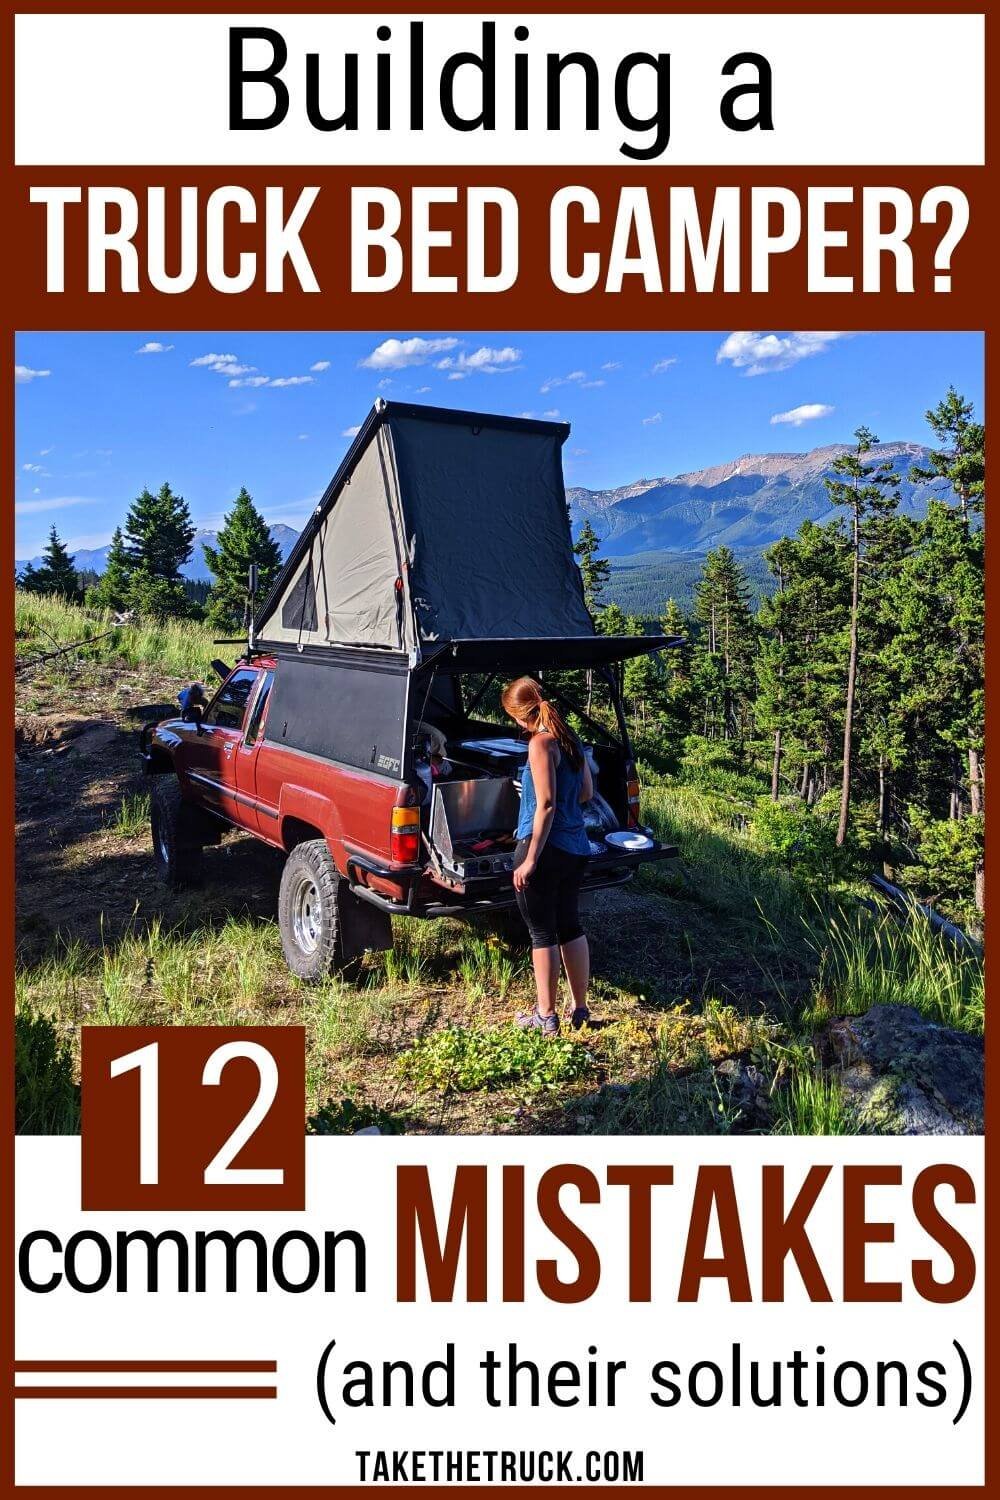 Want to build your own truck bed camper? Read this post first for 12 common mistakes you’ll want to avoid in your diy truck bed camper build. Start truck topper camping like a pro!